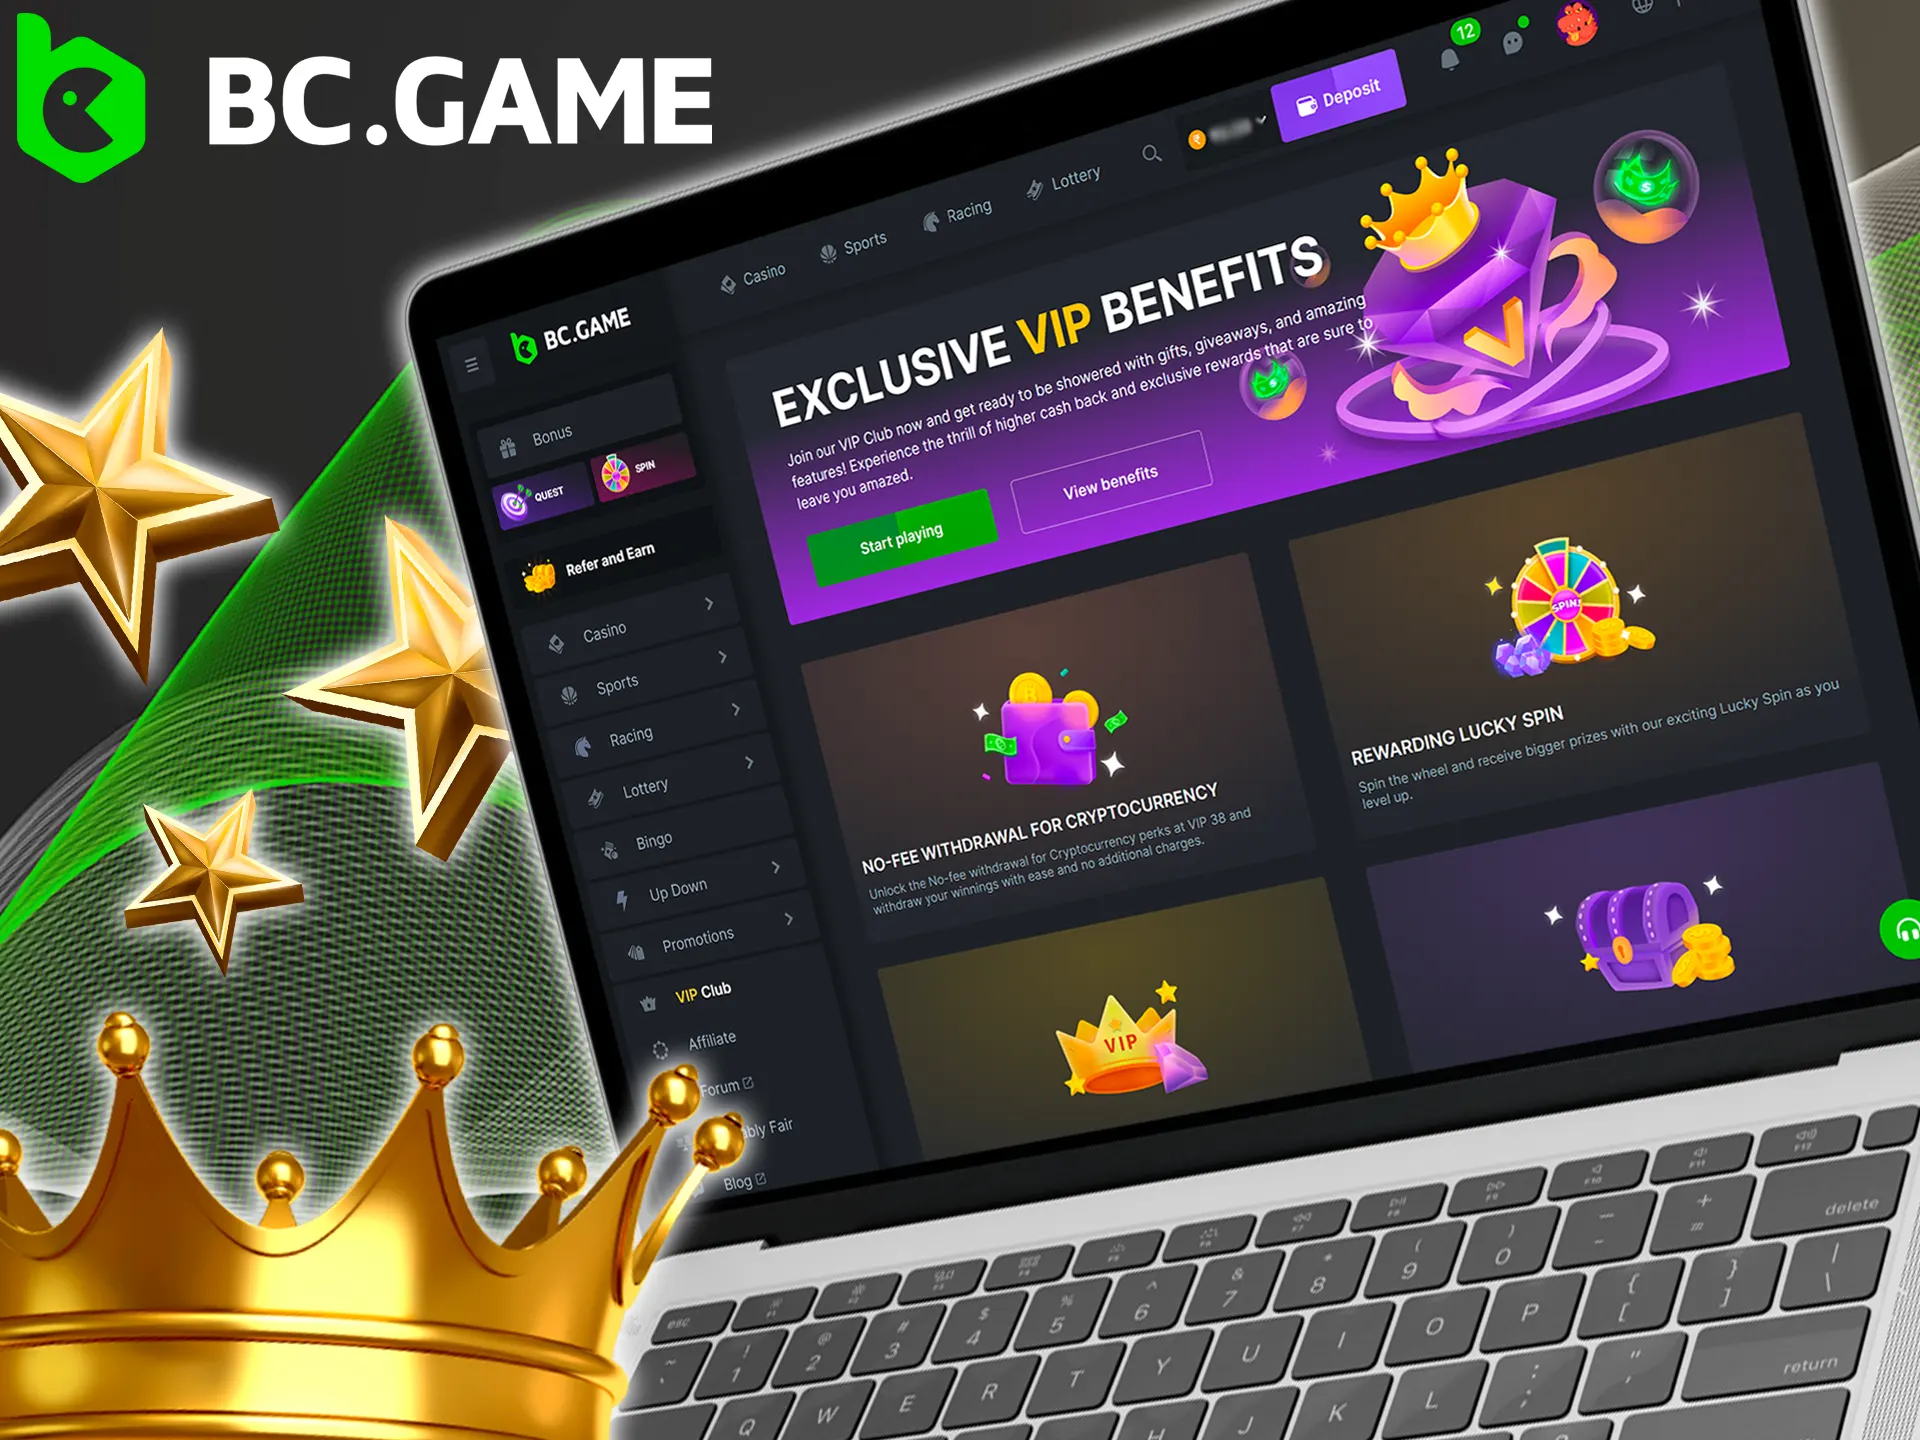 Find out what benefits BC Game's VIP players have.